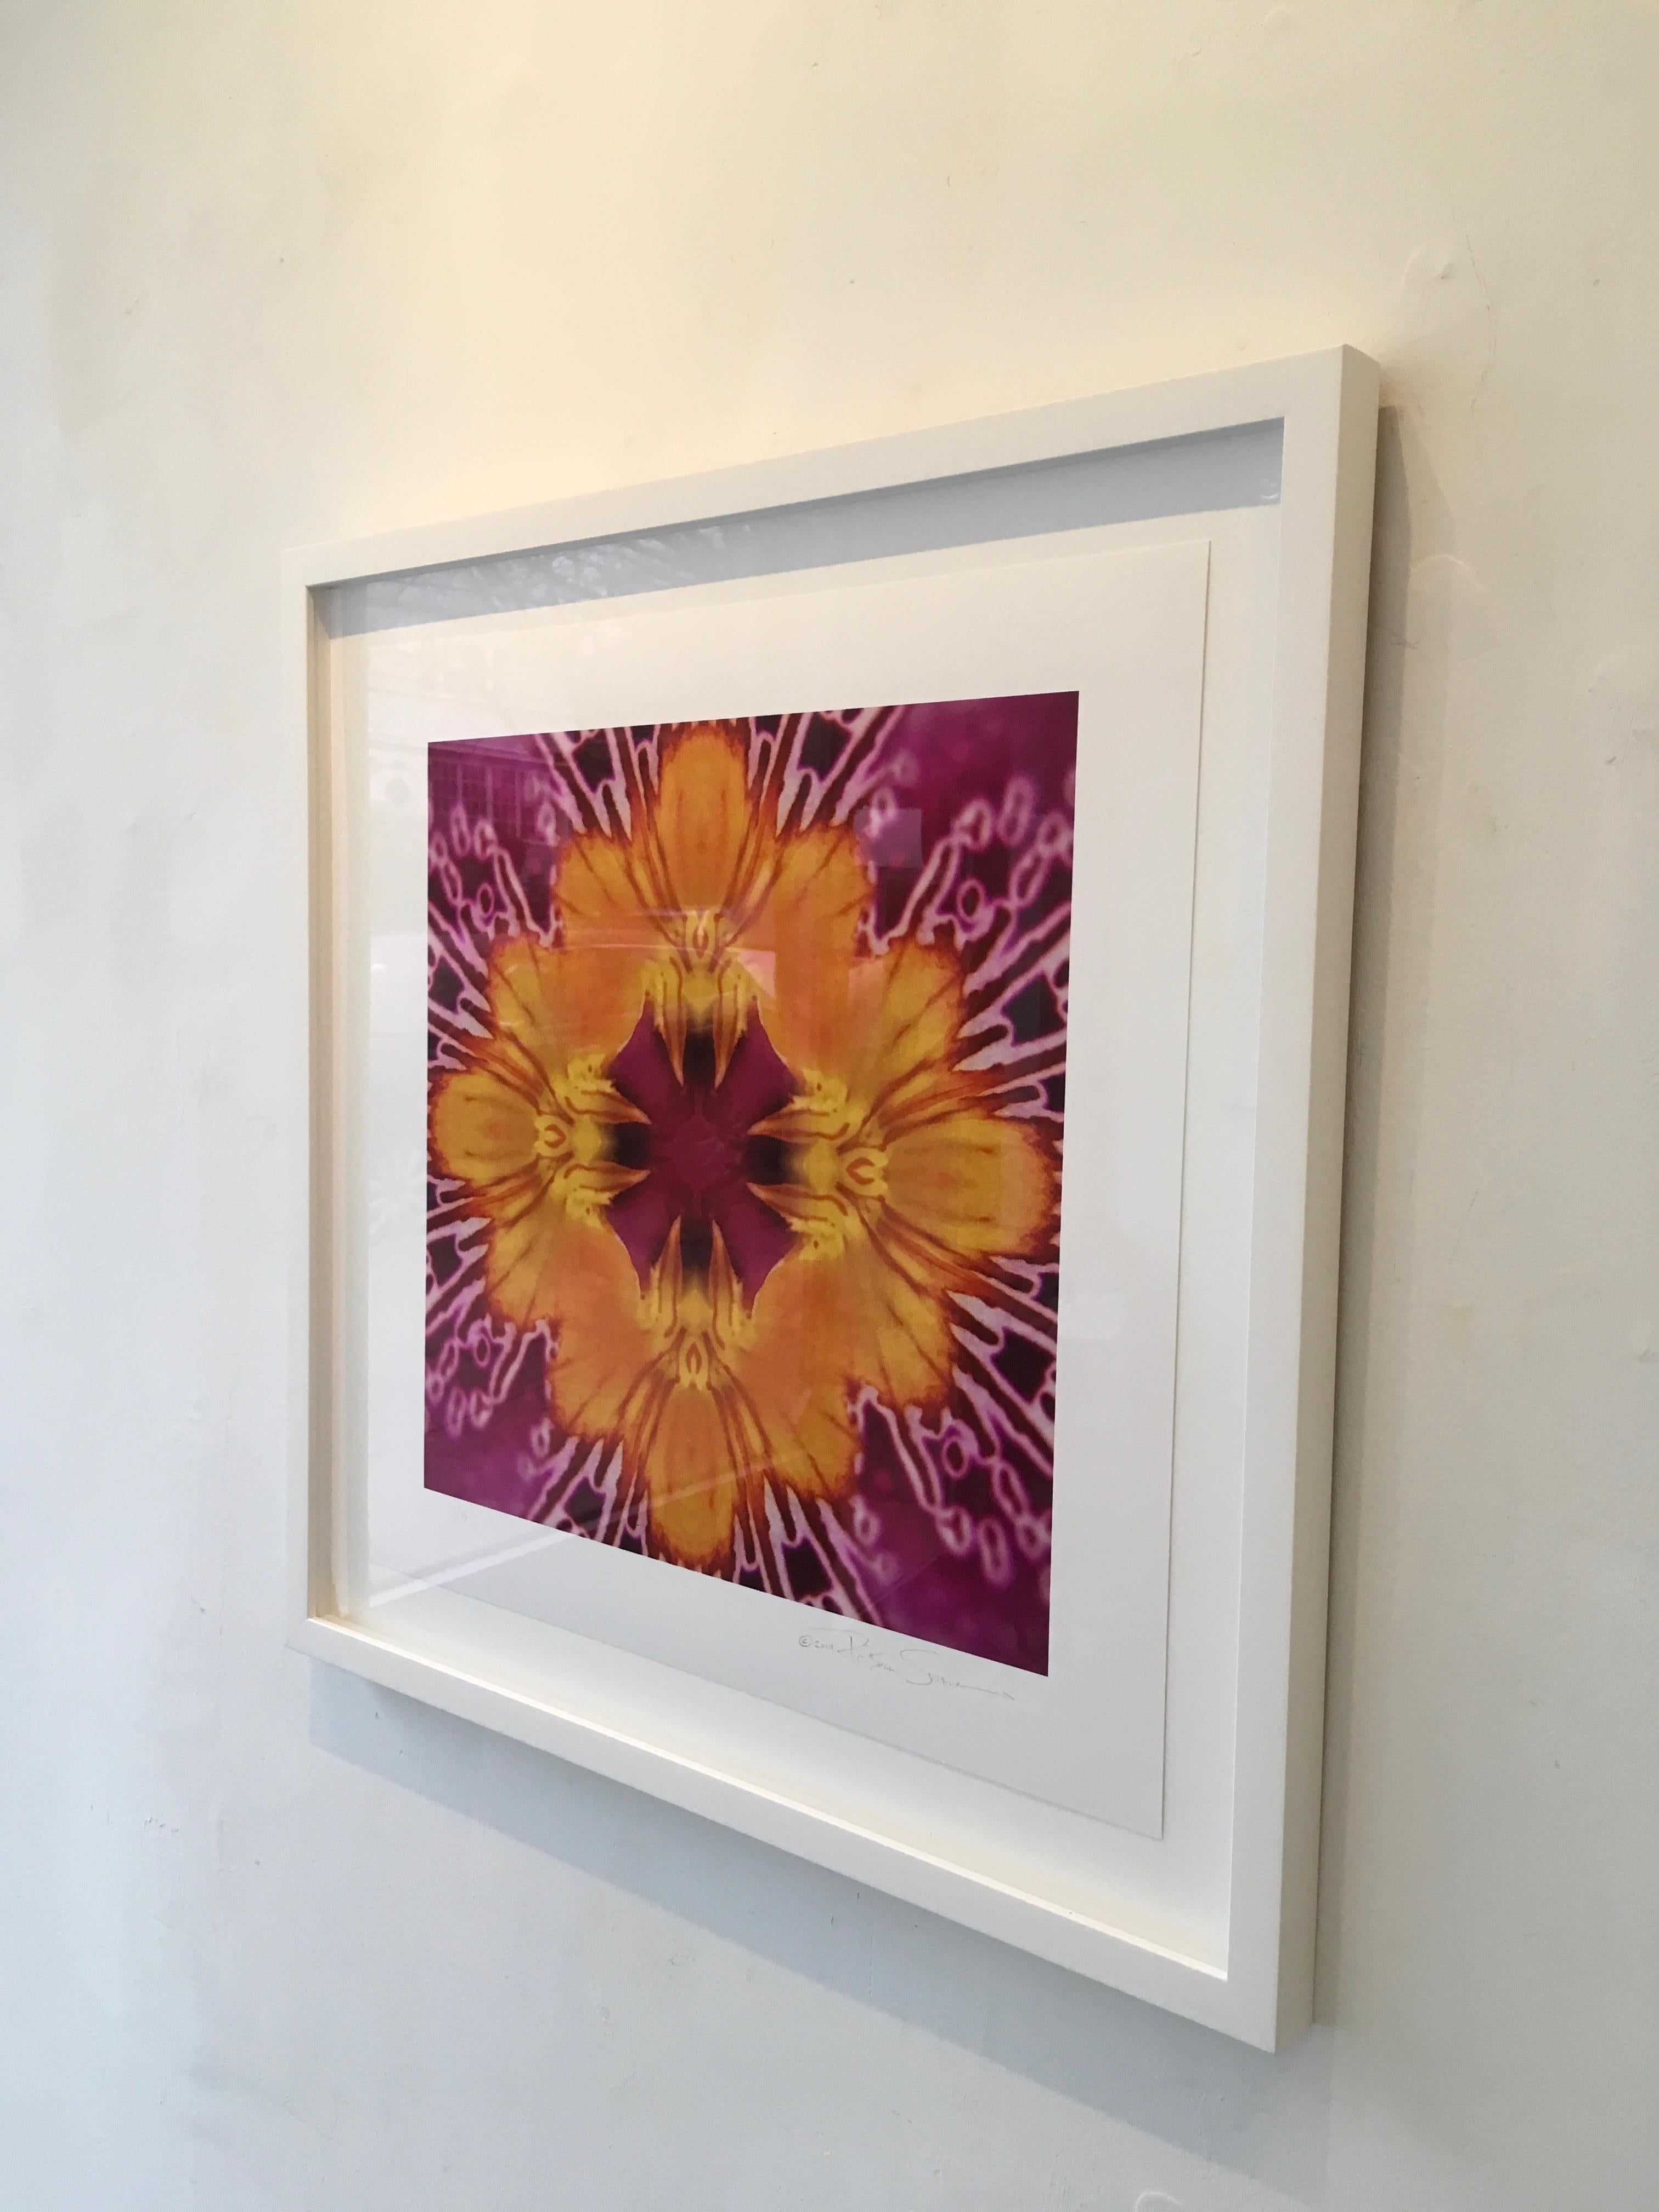 Rebecca Swanson, Graphic Blossom IV, Limited Edition Photograph, 15x15, with a white frame.  Framed size 36x36.  This stunning image is filled fuschia and a vibrant yellow colors.  This is an edition of 10.  Also available in 20x20

Rebecca